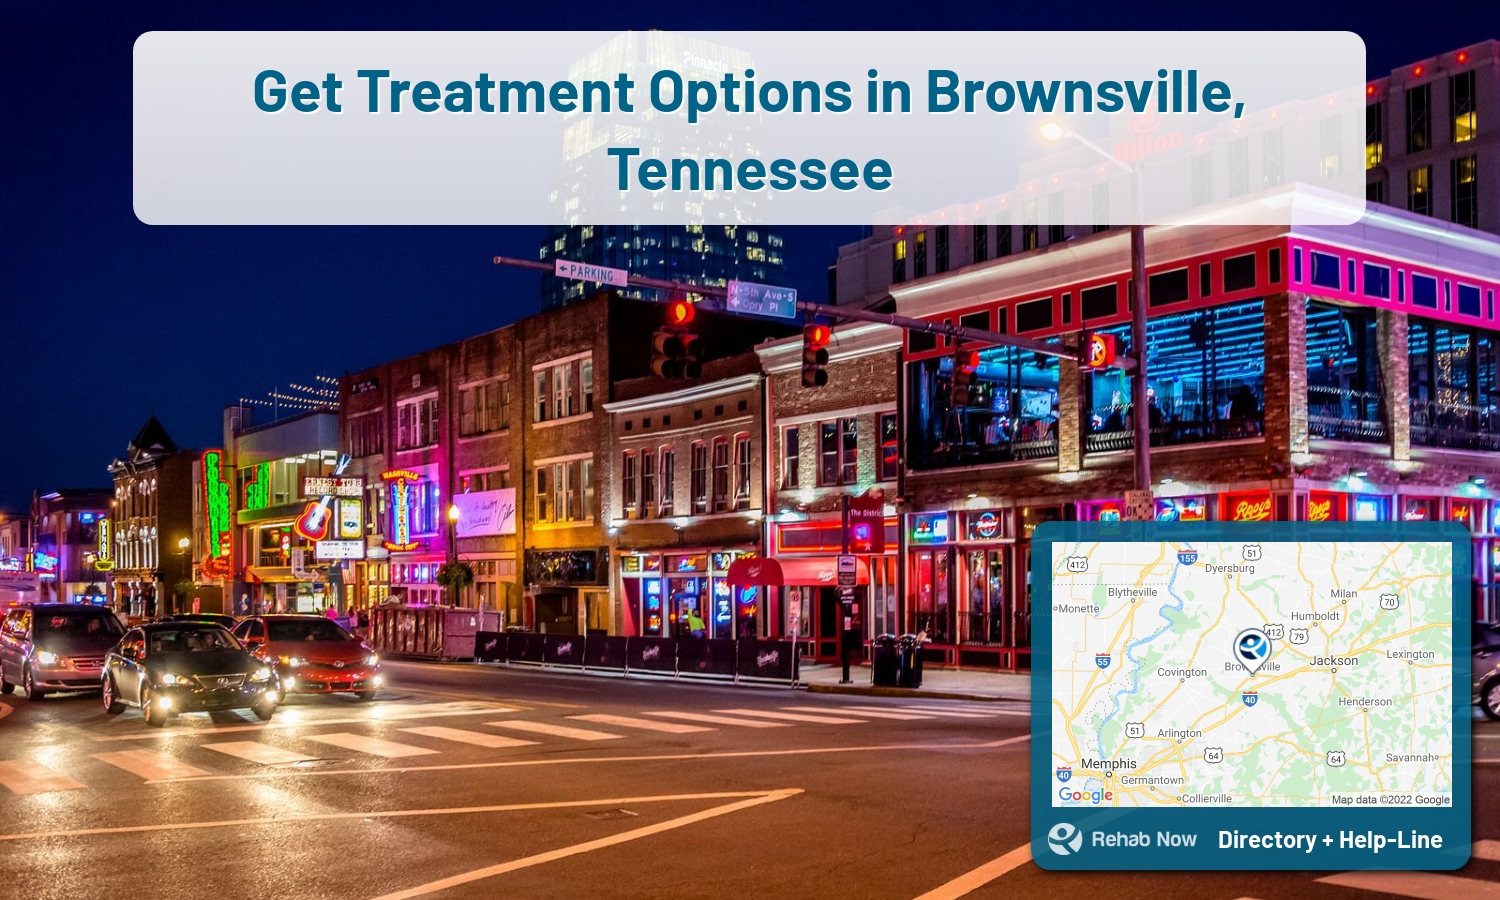 Drug rehab and alcohol treatment services nearby Brownsville, TN. Need help choosing a treatment program? Call our free hotline!